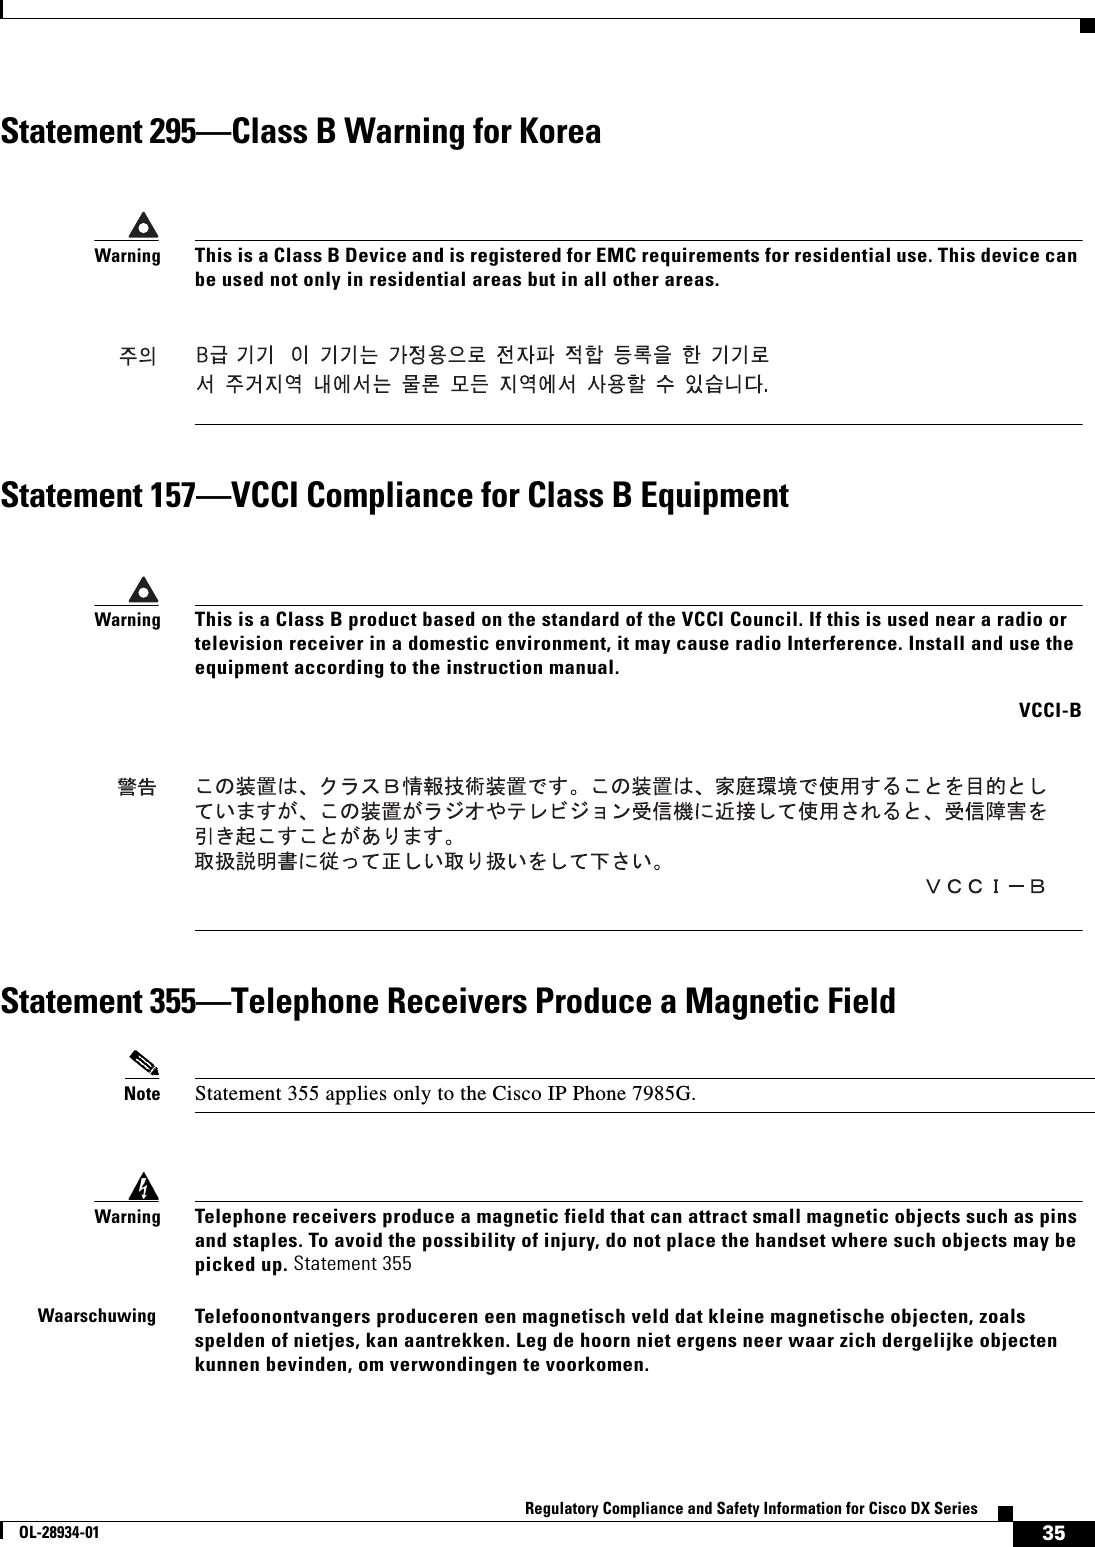  35Regulatory Compliance and Safety Information for Cisco DX SeriesOL-28934-01Statement 295—Class B Warning for KoreaStatement 157—VCCI Compliance for Class B EquipmentStatement 355—Telephone Receivers Produce a Magnetic FieldNote Statement 355 applies only to the Cisco IP Phone 7985G.WarningThis is a Class B Device and is registered for EMC requirements for residential use. This device can be used not only in residential areas but in all other areas.WarningThis is a Class B product based on the standard of the VCCI Council. If this is used near a radio or television receiver in a domestic environment, it may cause radio Interference. Install and use the equipment according to the instruction manual. VCCI-BWarningTelephone receivers produce a magnetic field that can attract small magnetic objects such as pins and staples. To avoid the possibility of injury, do not place the handset where such objects may be picked up. Statement 355WaarschuwingTelefoonontvangers produceren een magnetisch veld dat kleine magnetische objecten, zoals spelden of nietjes, kan aantrekken. Leg de hoorn niet ergens neer waar zich dergelijke objecten kunnen bevinden, om verwondingen te voorkomen.